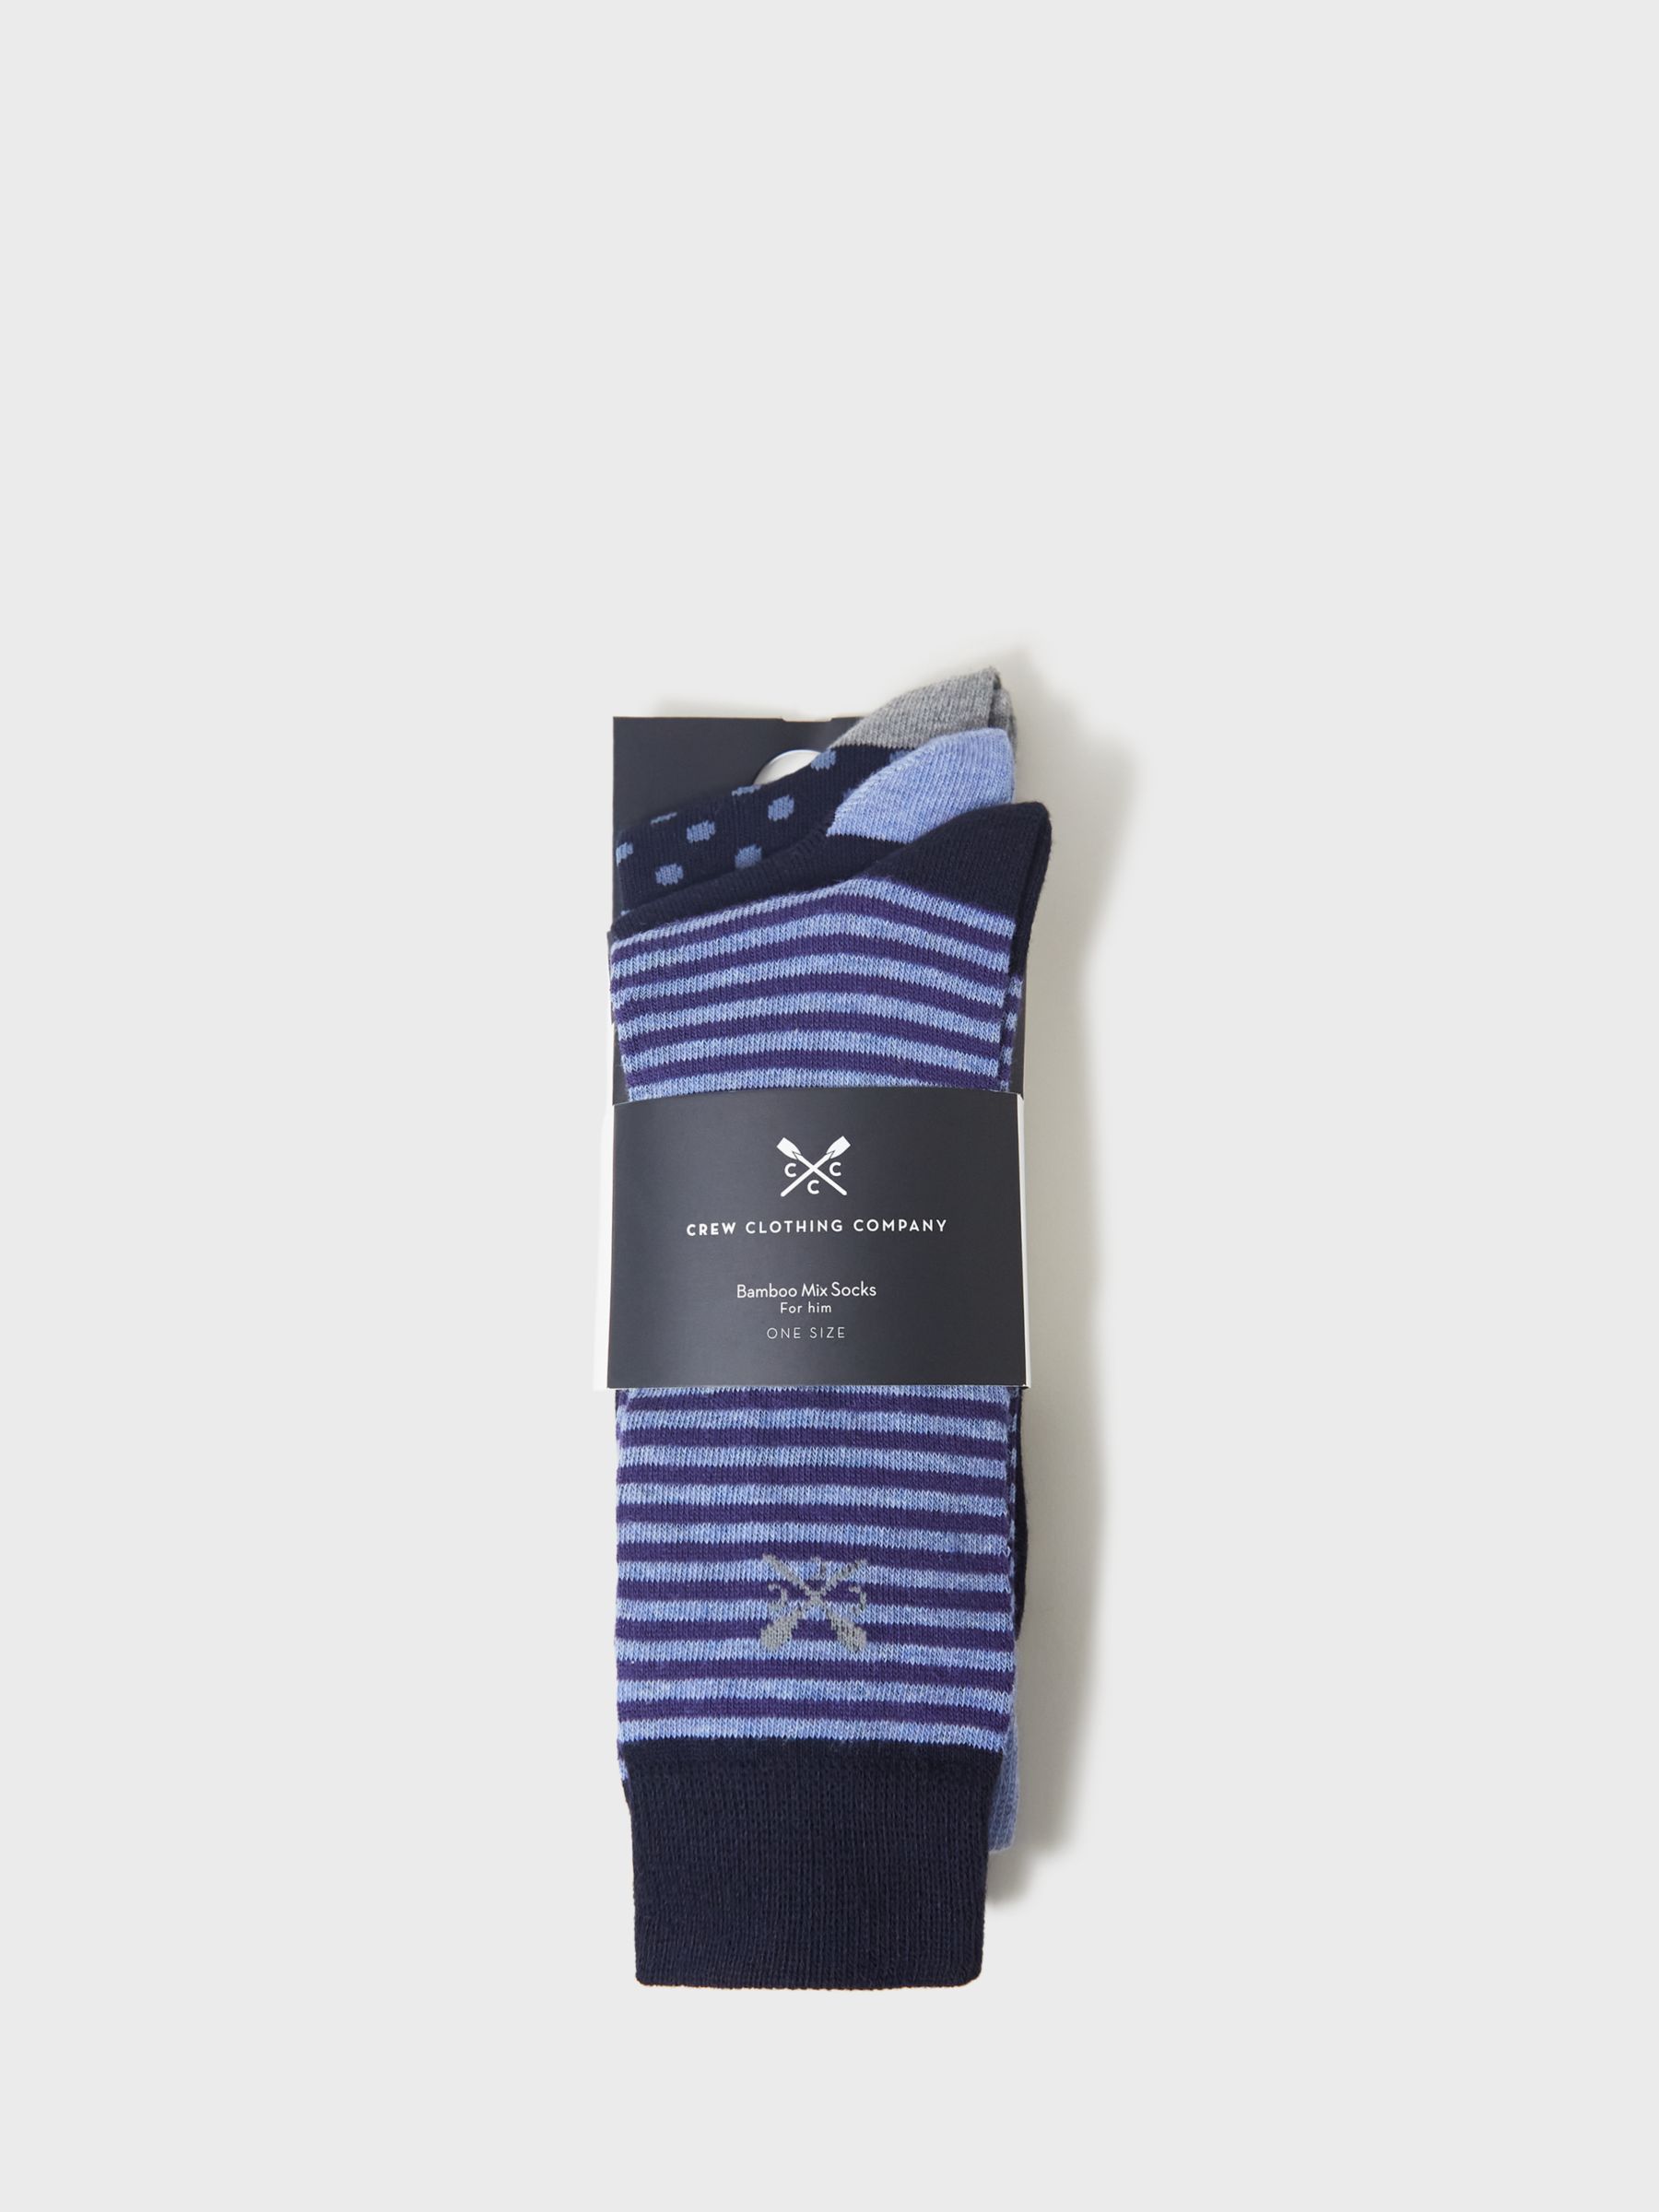 Crew Clothing Bamboo Blend Socks, Pack of 3, Navy Blue, One Size